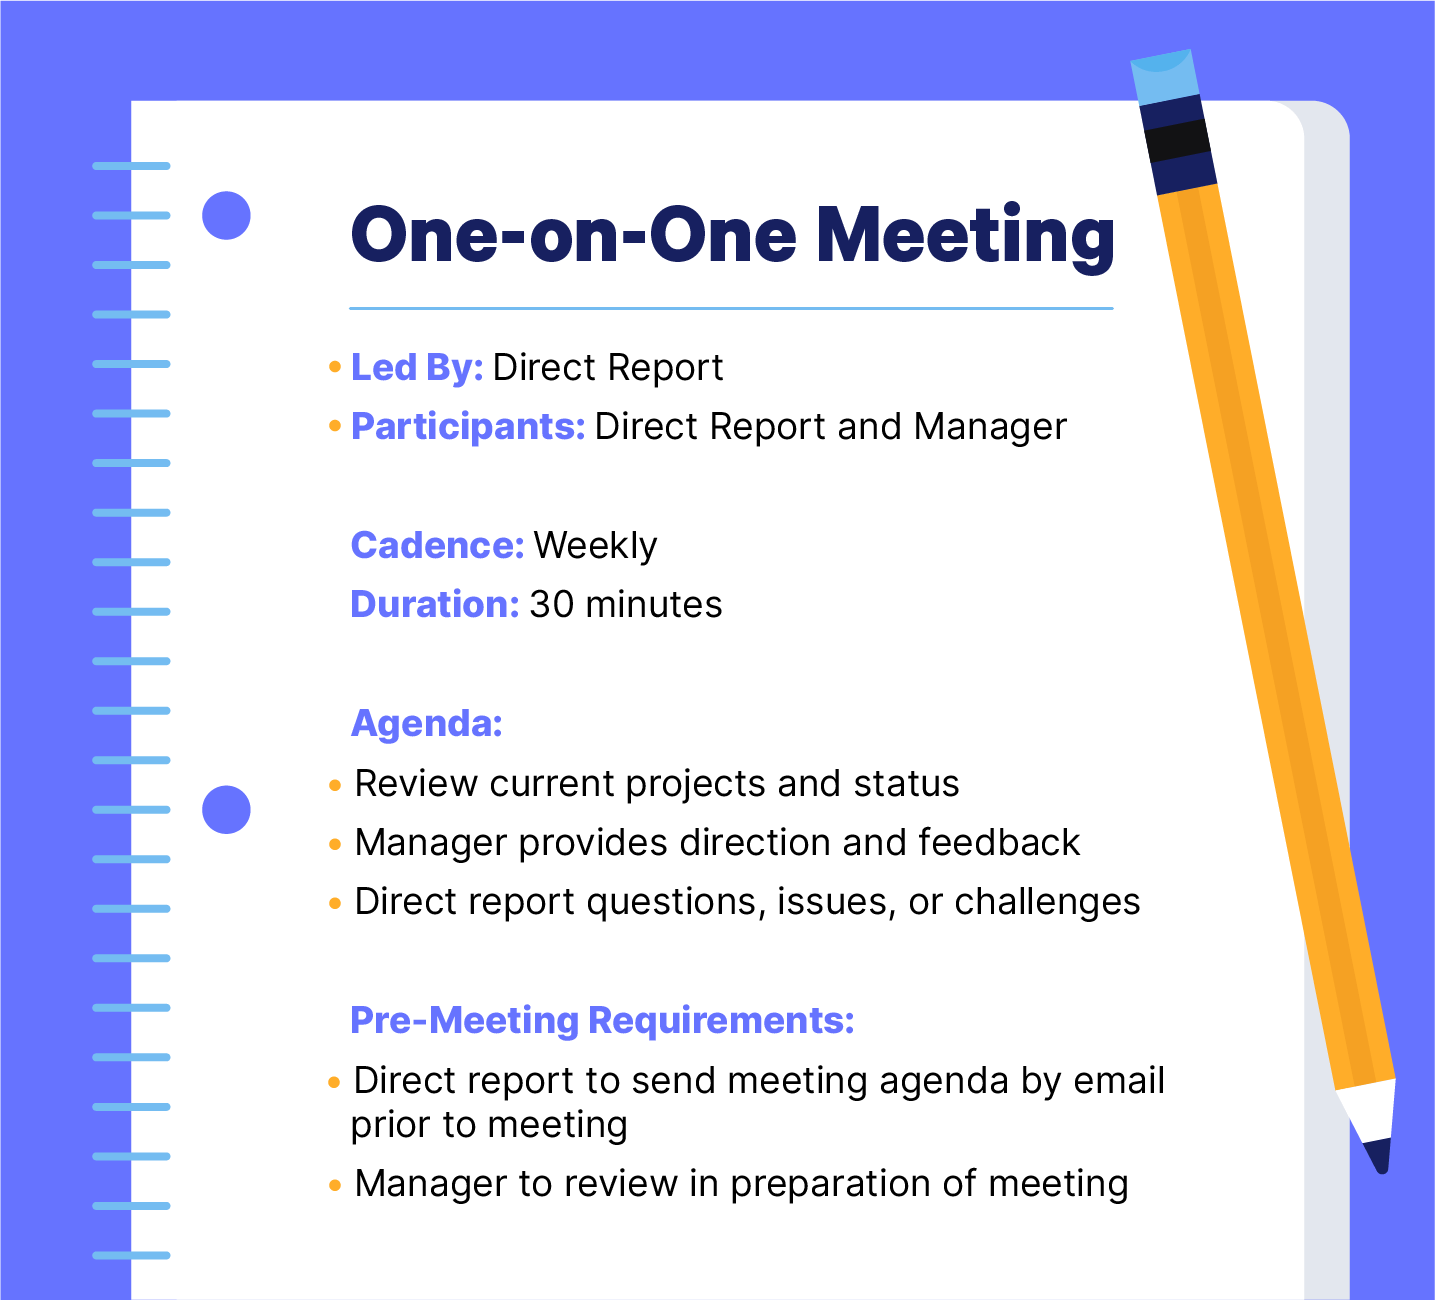 Notepad outlining one-on-one startup meetings requirements